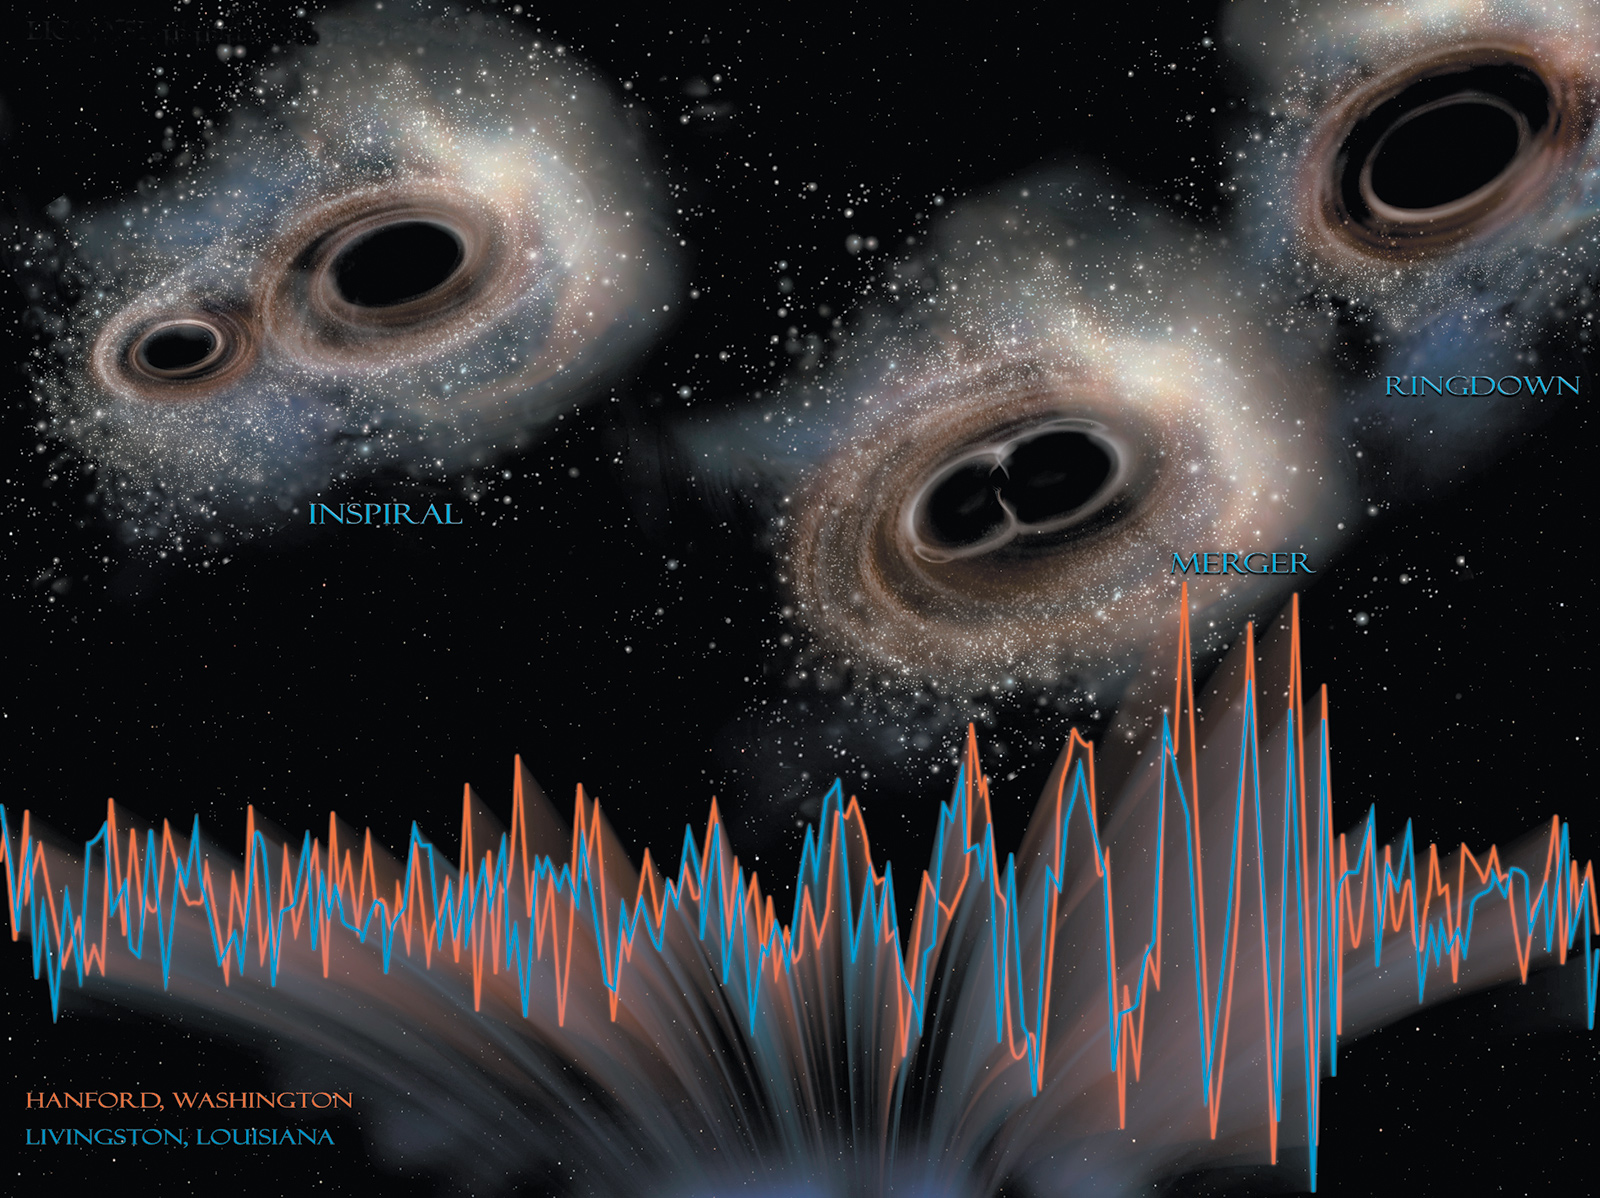 A simulation of the collision of two black holes, which merged about 1.3 billion years ago to form a single black hole sixty-two times the mass of the sun. In the first discovery of its kind, the gravitational waves were detected simultaneously last September by the two branches of the Laser Interferometer Gravitational-Wave Observatory (LIGO), located in Hanford, Washington, and Livingston, Louisiana, and announced in February 2016.